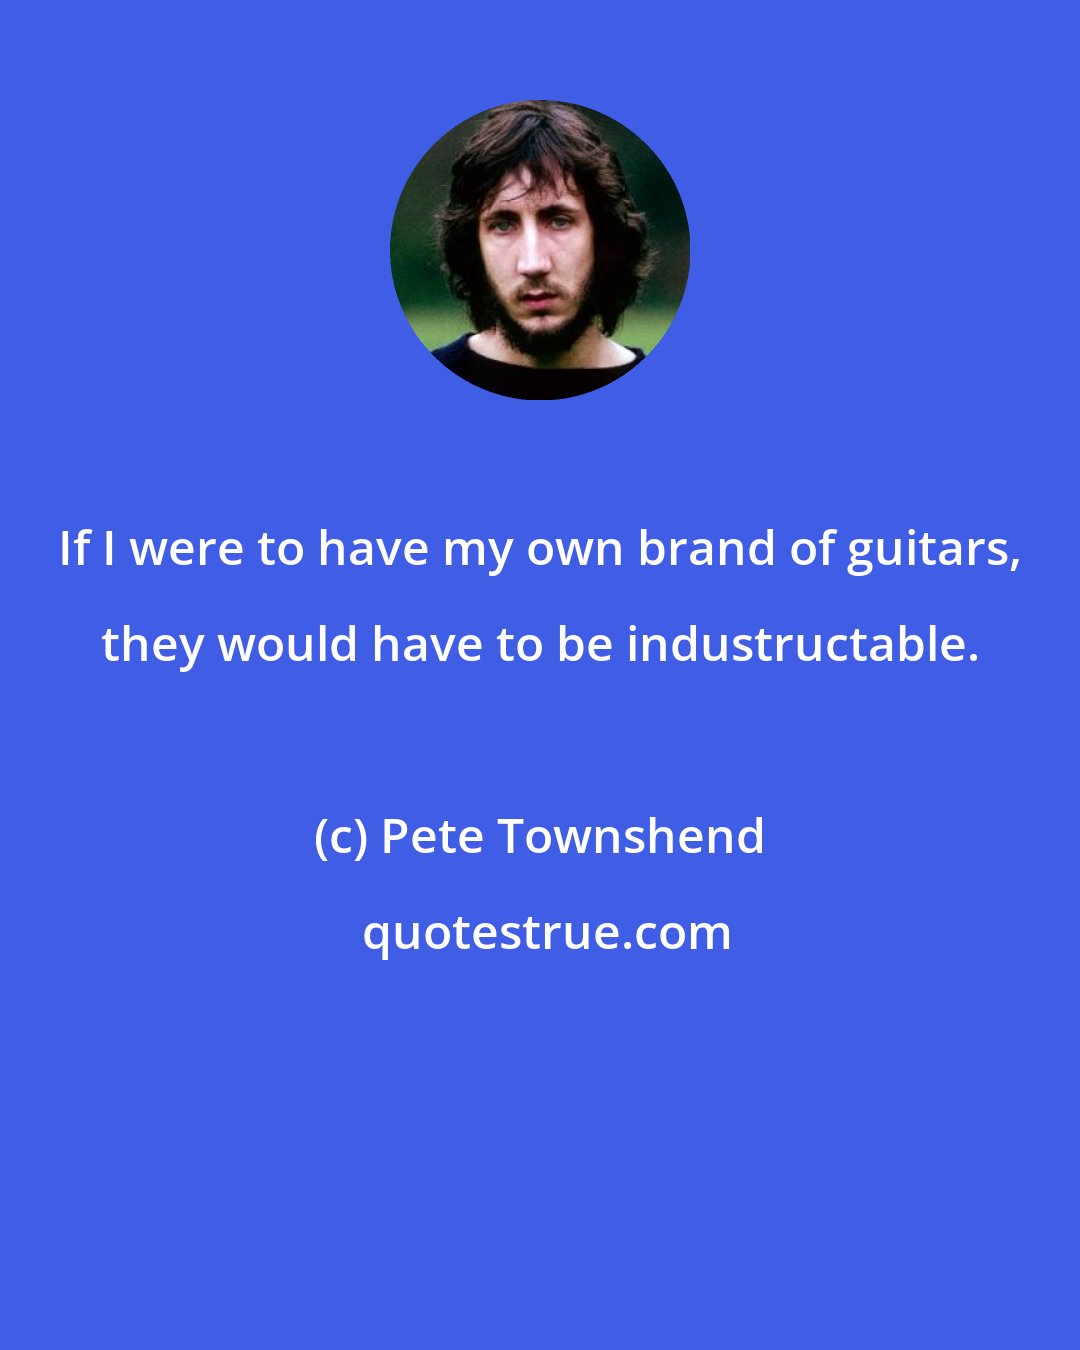 Pete Townshend: If I were to have my own brand of guitars, they would have to be industructable.